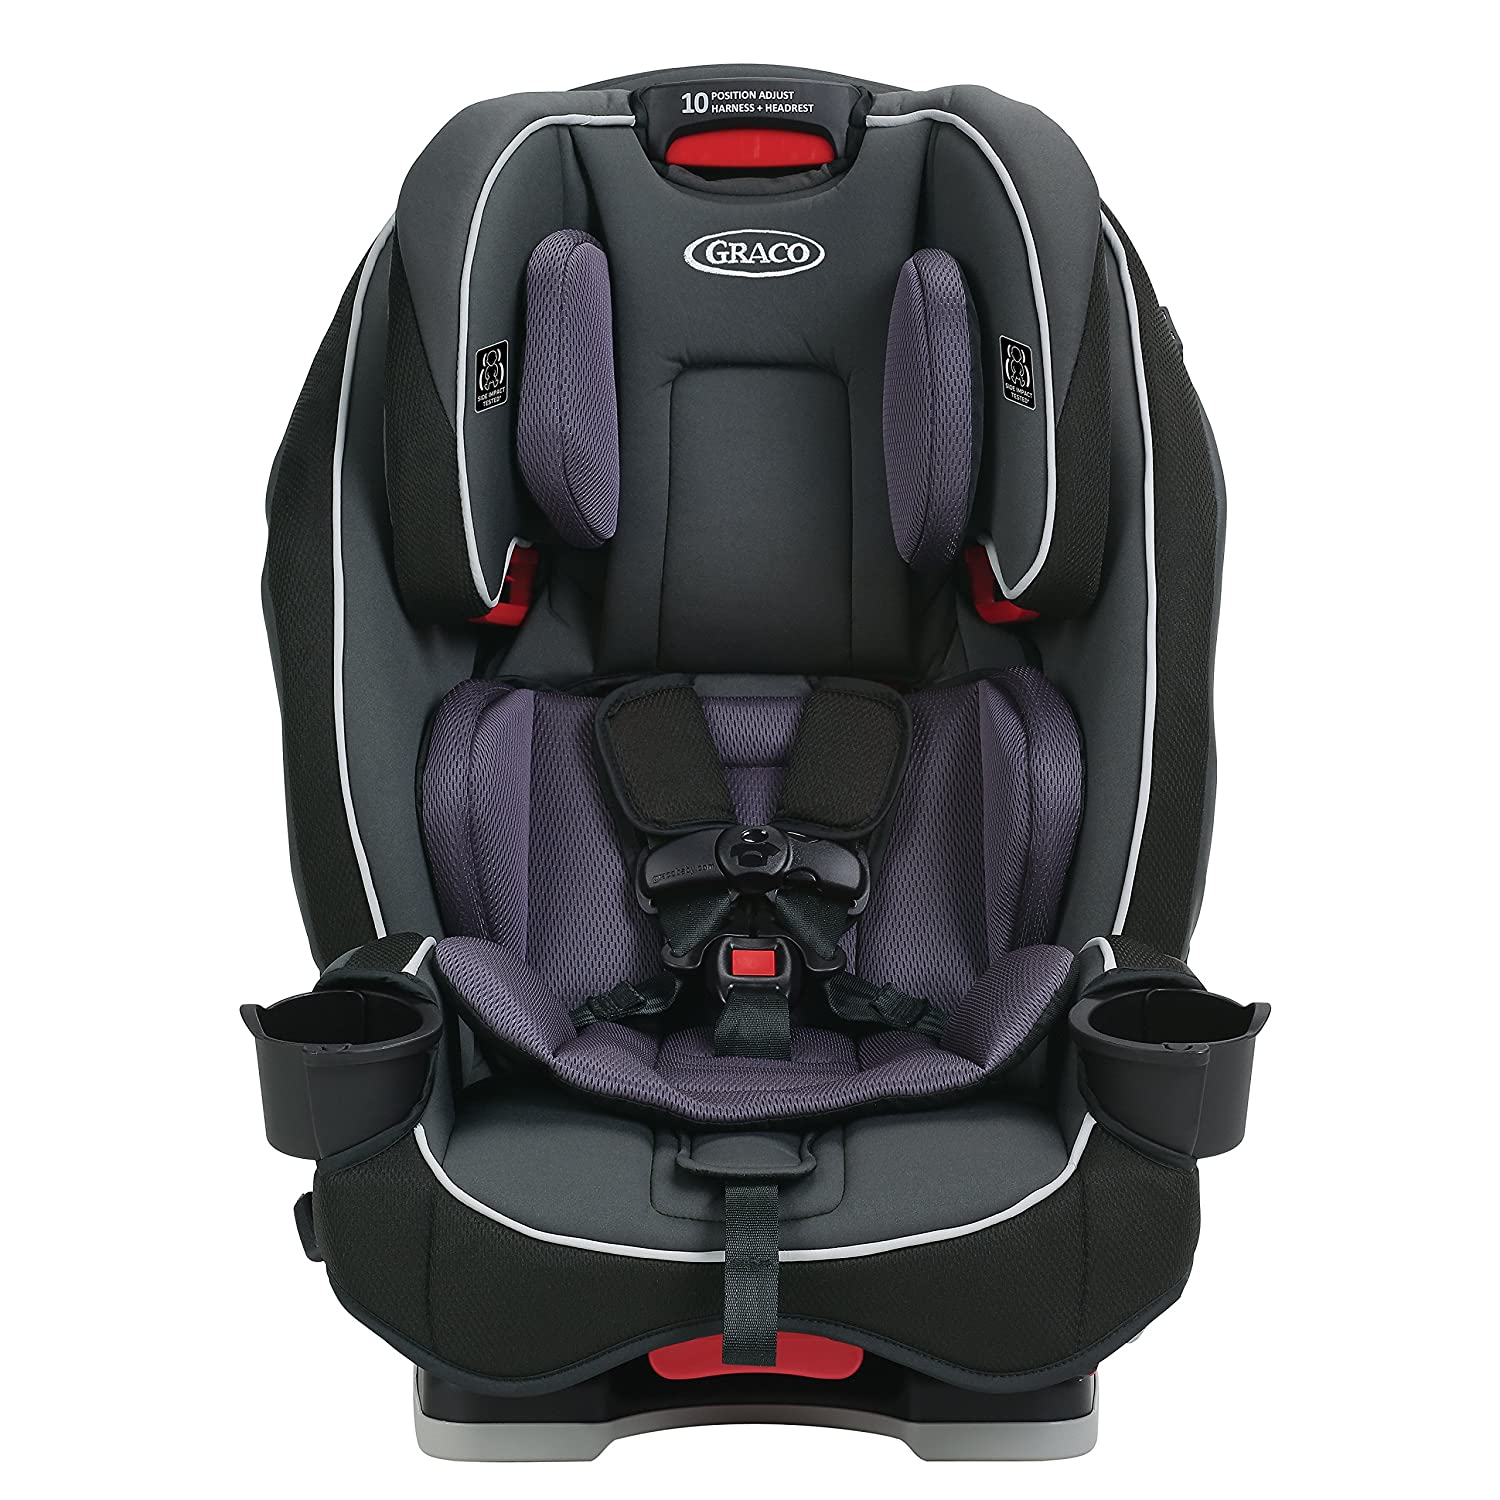 Graco-SlimFit-3-in-1-Convertible-Car-Seat-,-Infant-to-...